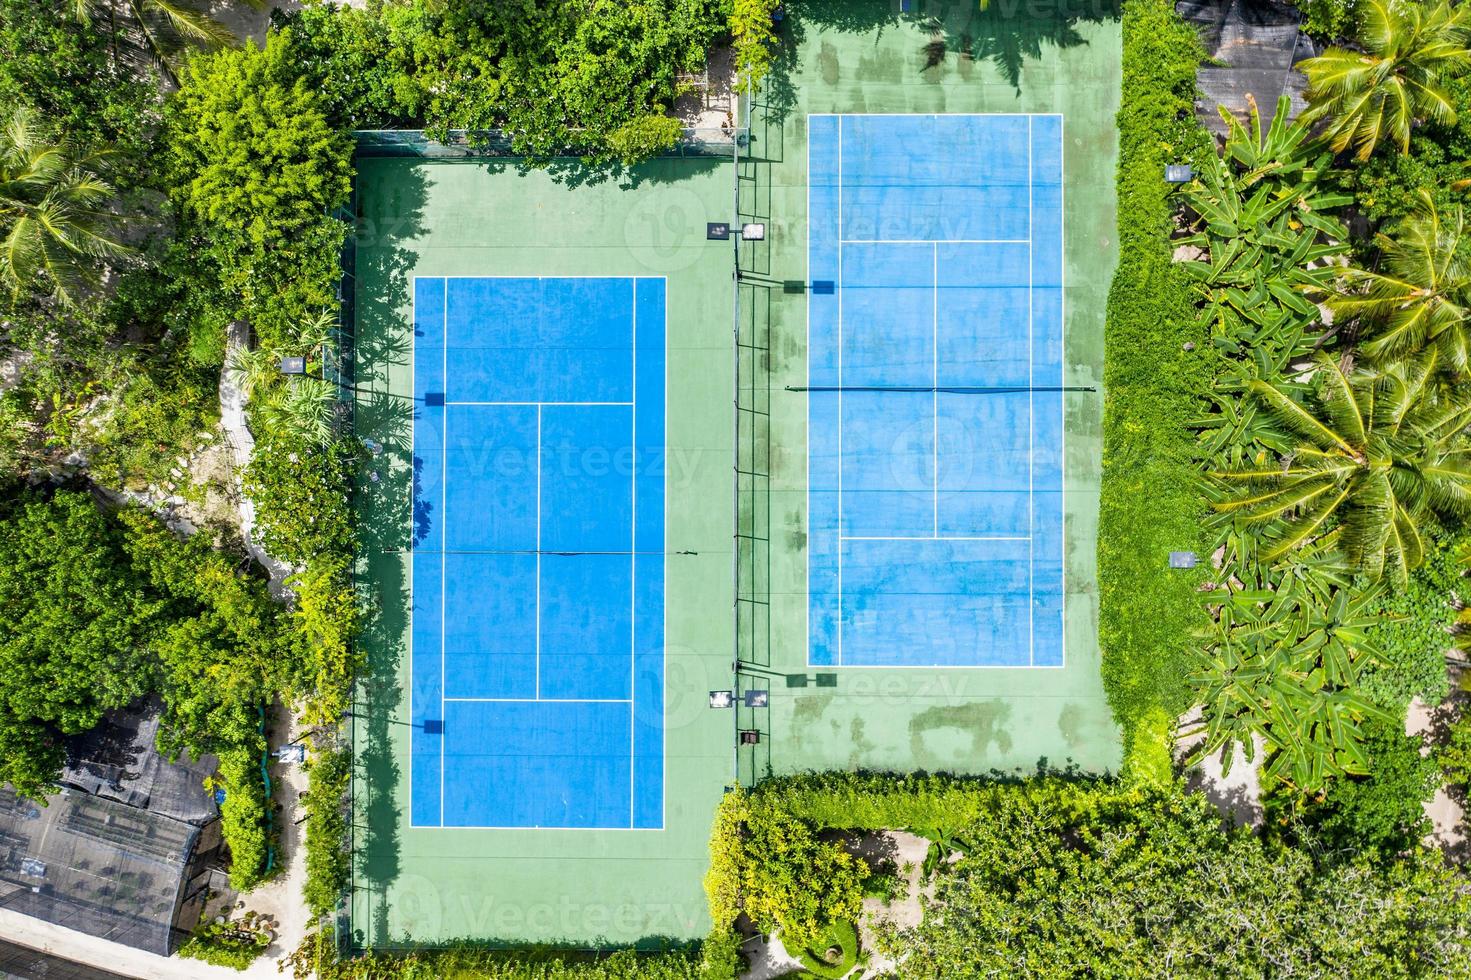 Amazing birds eye view of a tennis court surrounded by palm trees. Aerial tennis fields, outdoor sport and recreation concept photo